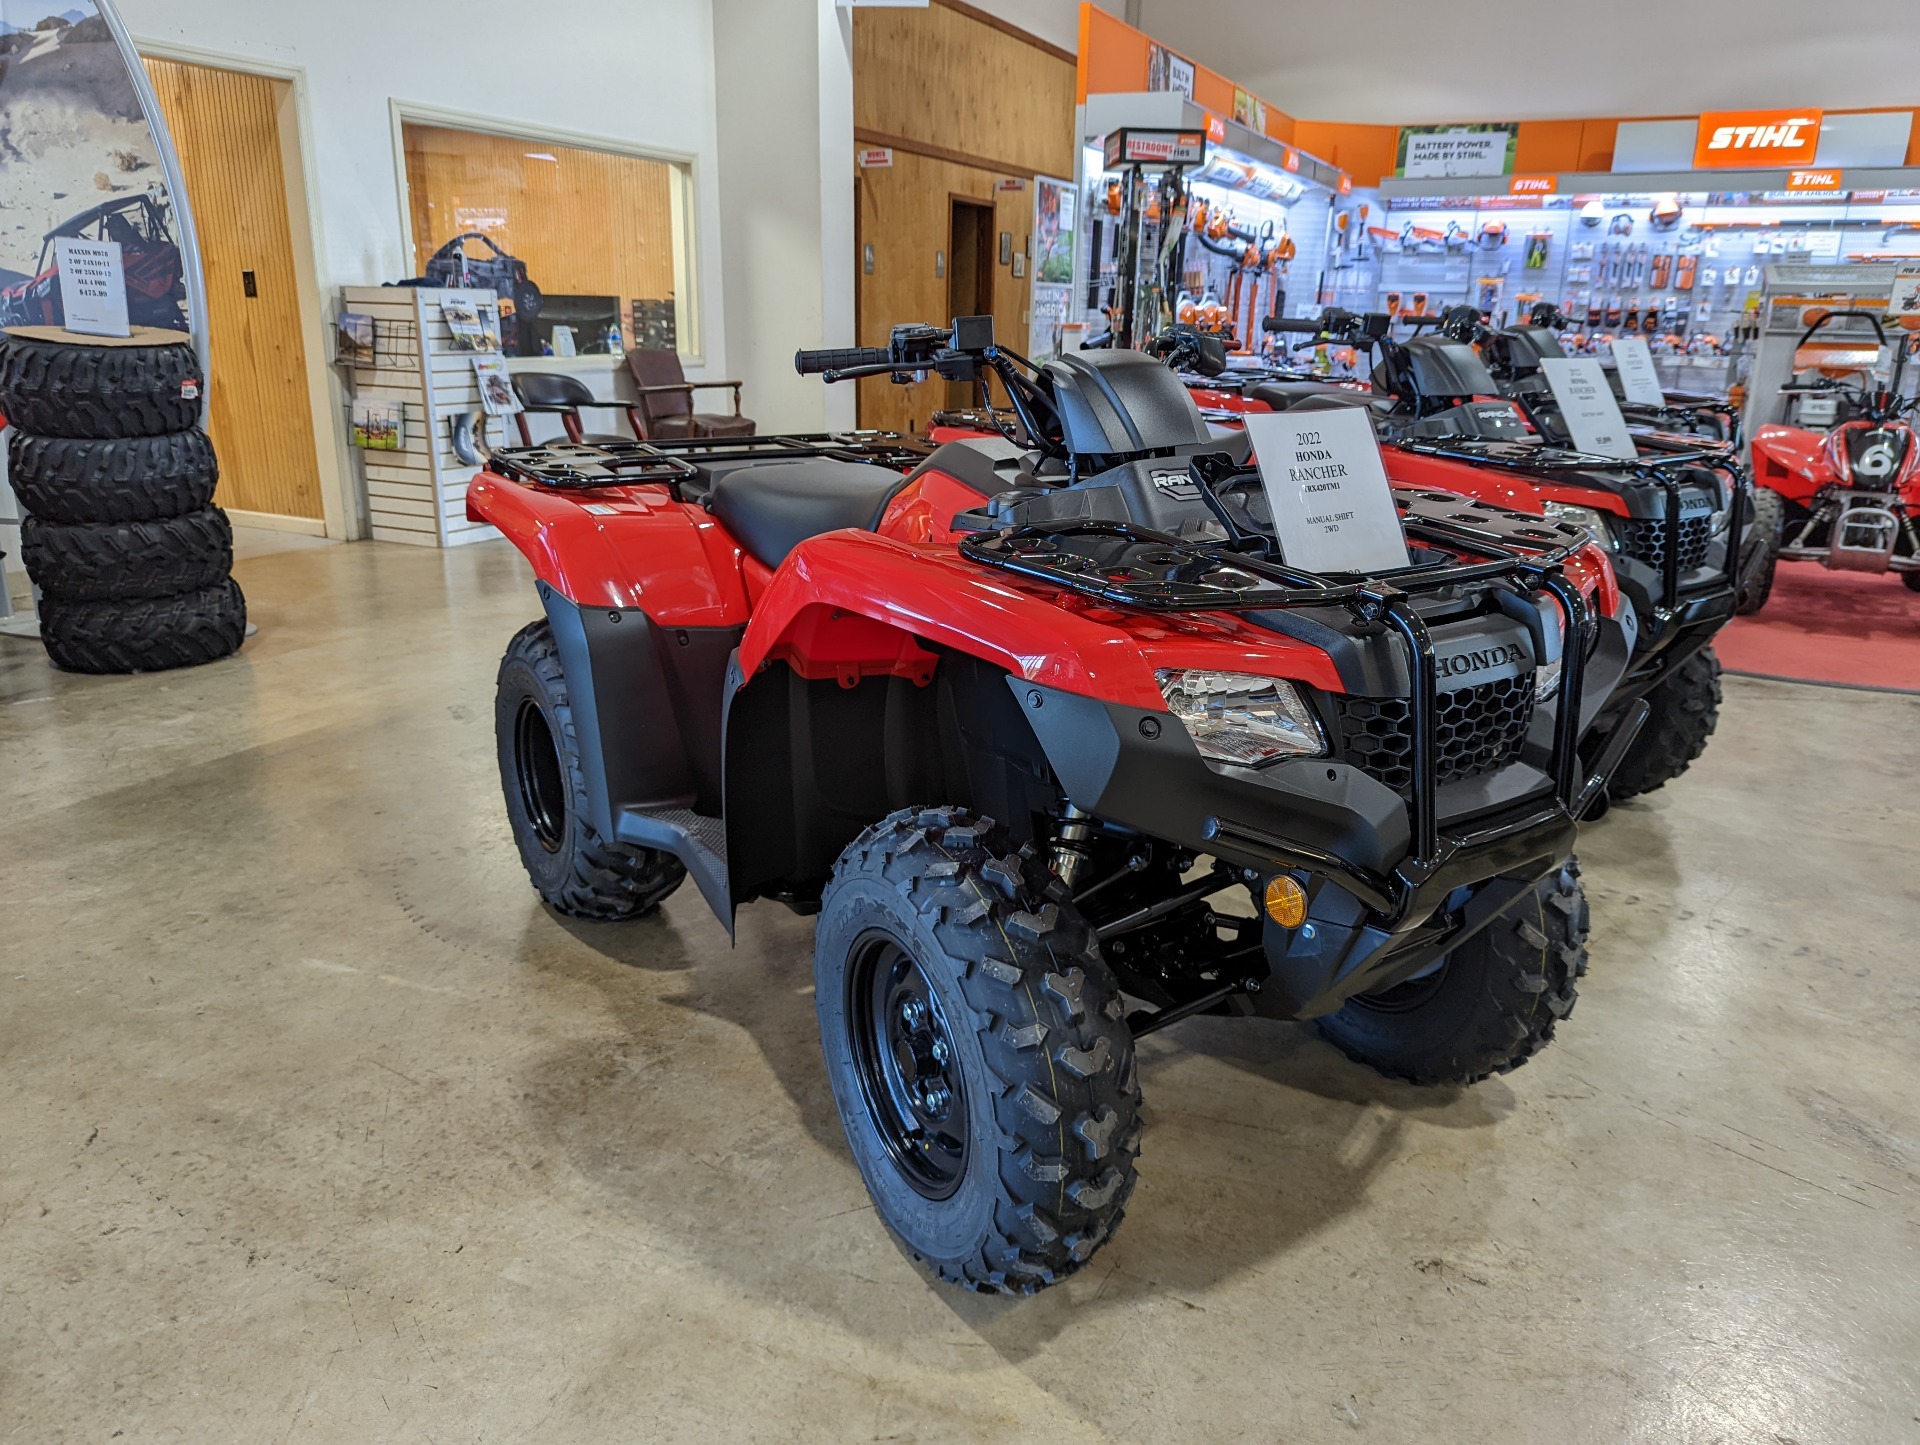 2022 Honda FourTrax Rancher in Winchester, Tennessee - Photo 1